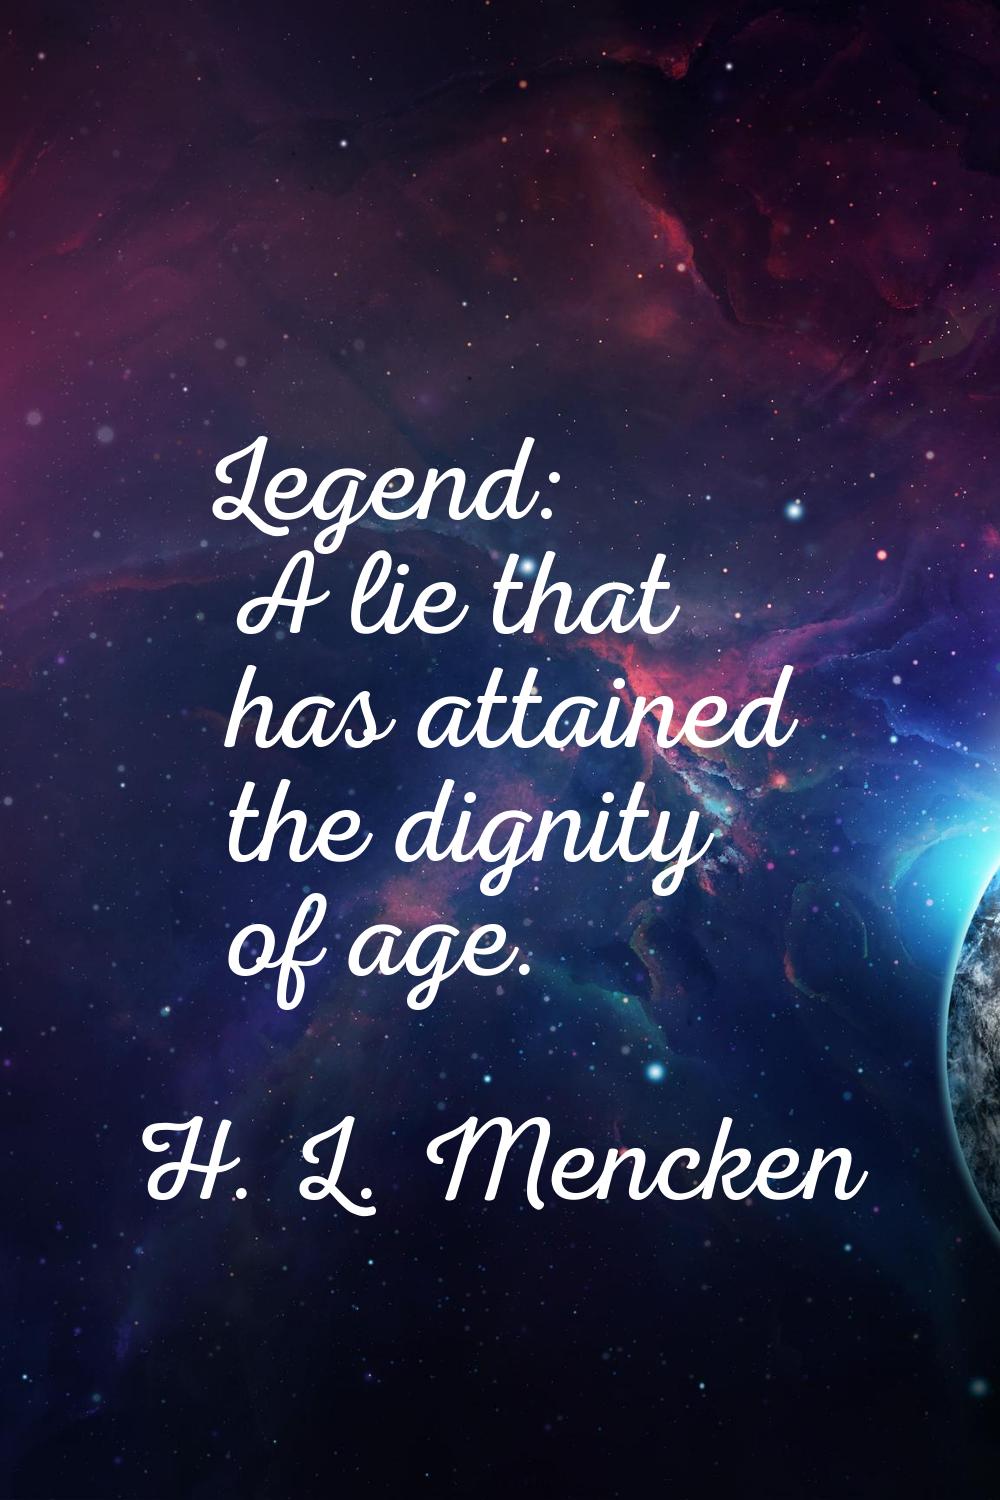 Legend: A lie that has attained the dignity of age.